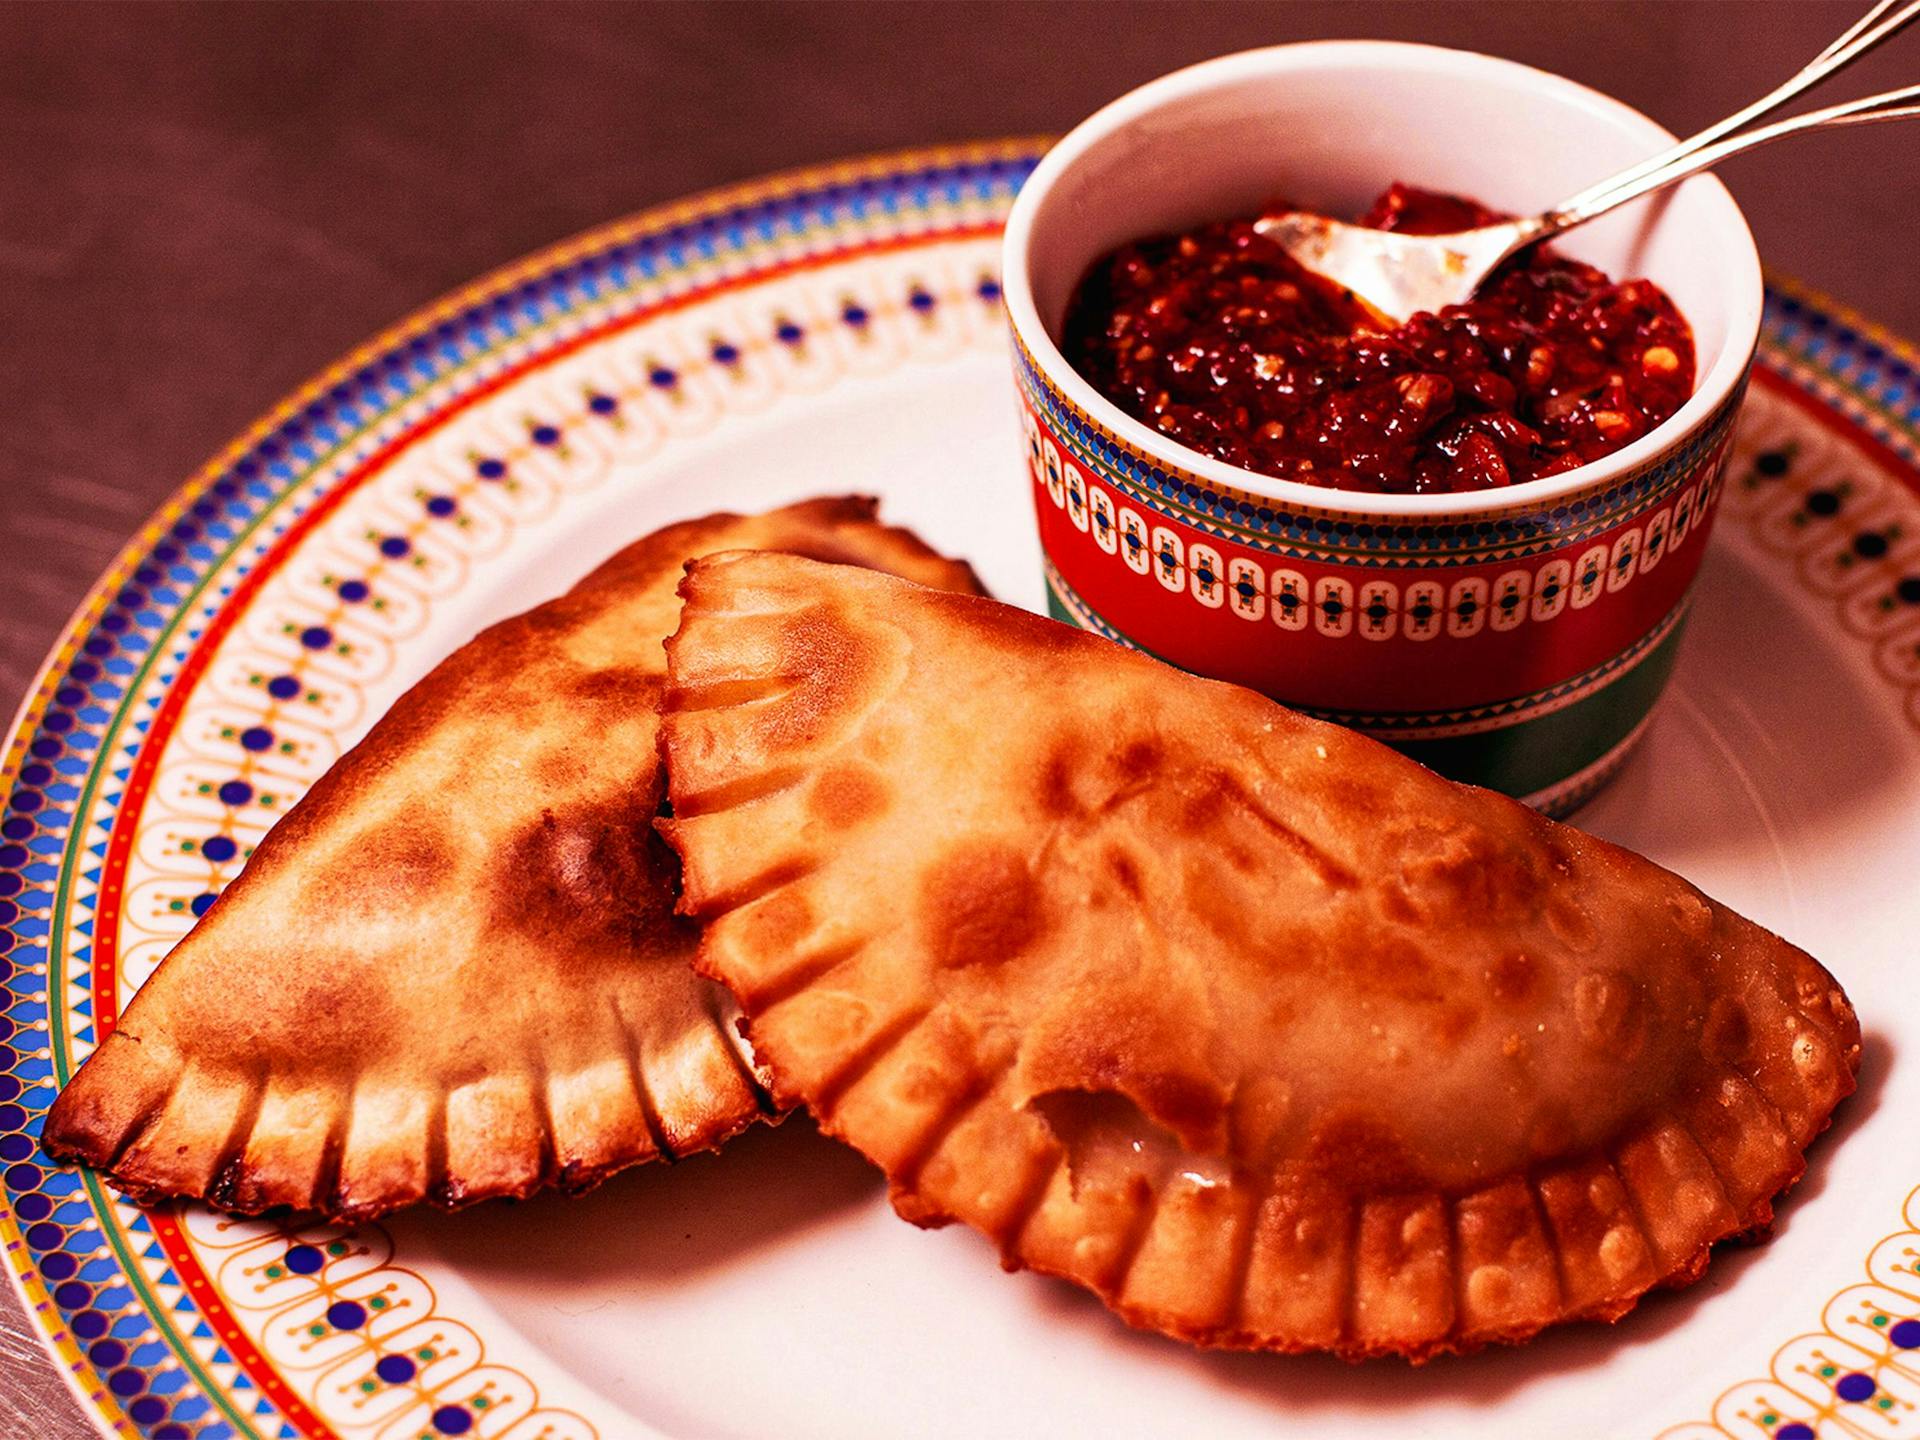 Two empanadas on a plate with a dipping sauce